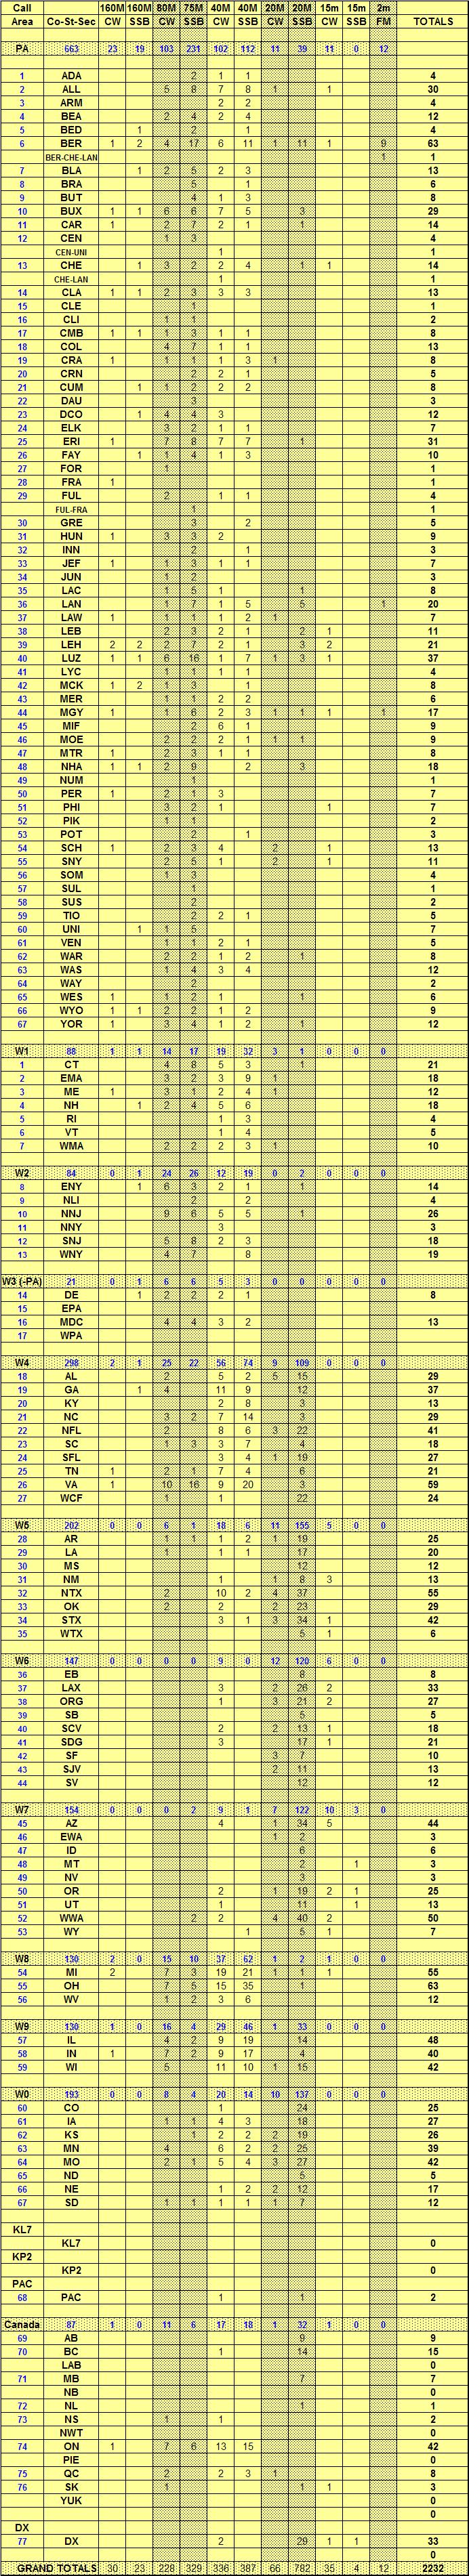 The count of all 2232 contacts by Pennsylvania County, US and Canadian Sections, and DX by Band and Mode. Included are totals and subtotals. Can you see which station-antenna combinations worked the best? This chart built from the TR Log data in an MS Excel Spreadsheet by Norm Styer - AI2C de Clarkes Gap, Virginia.